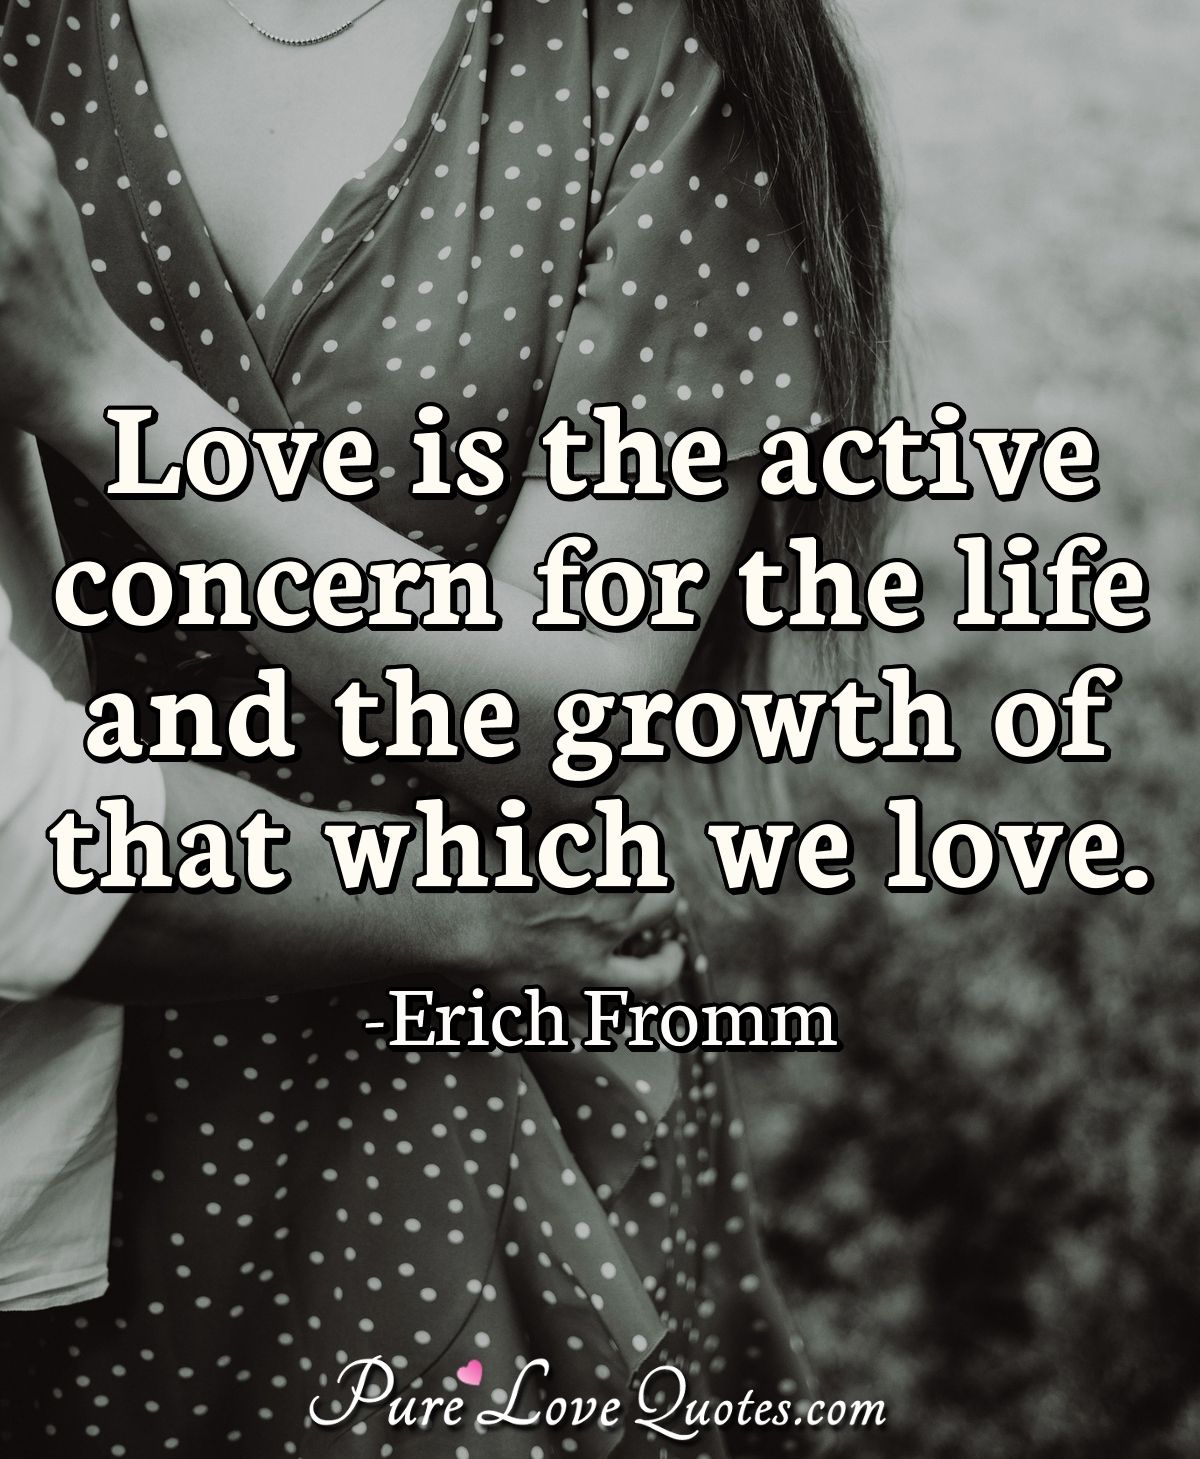 Love is the active concern for the life and the growth of that which we love. - Erich Fromm